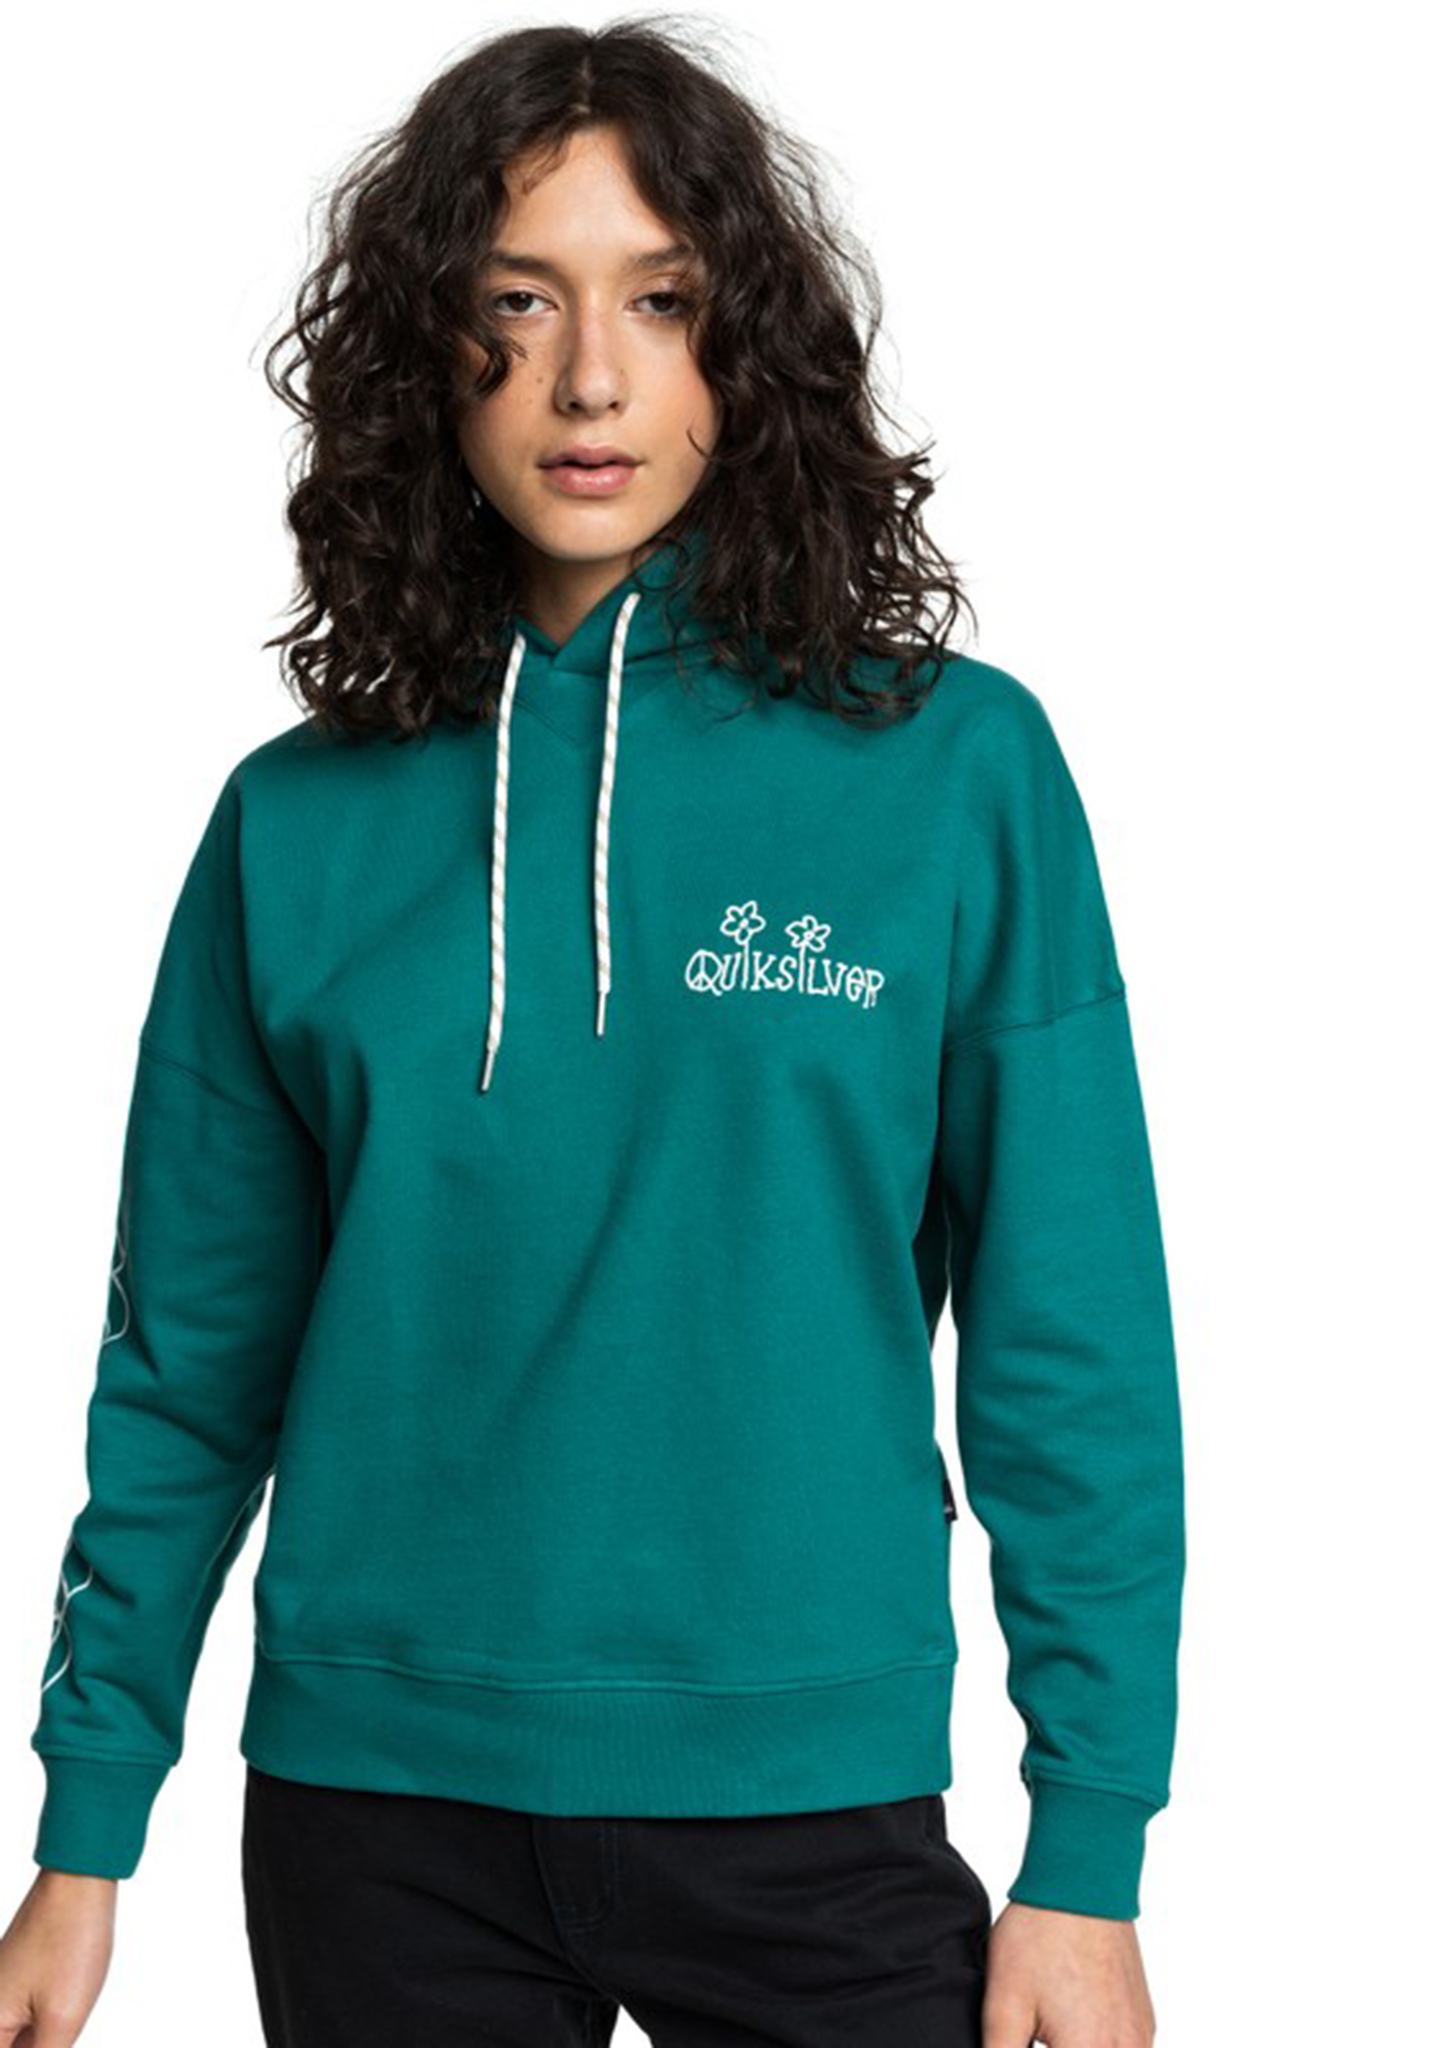 Quiksilver Og Boxy Hoodies teal green M